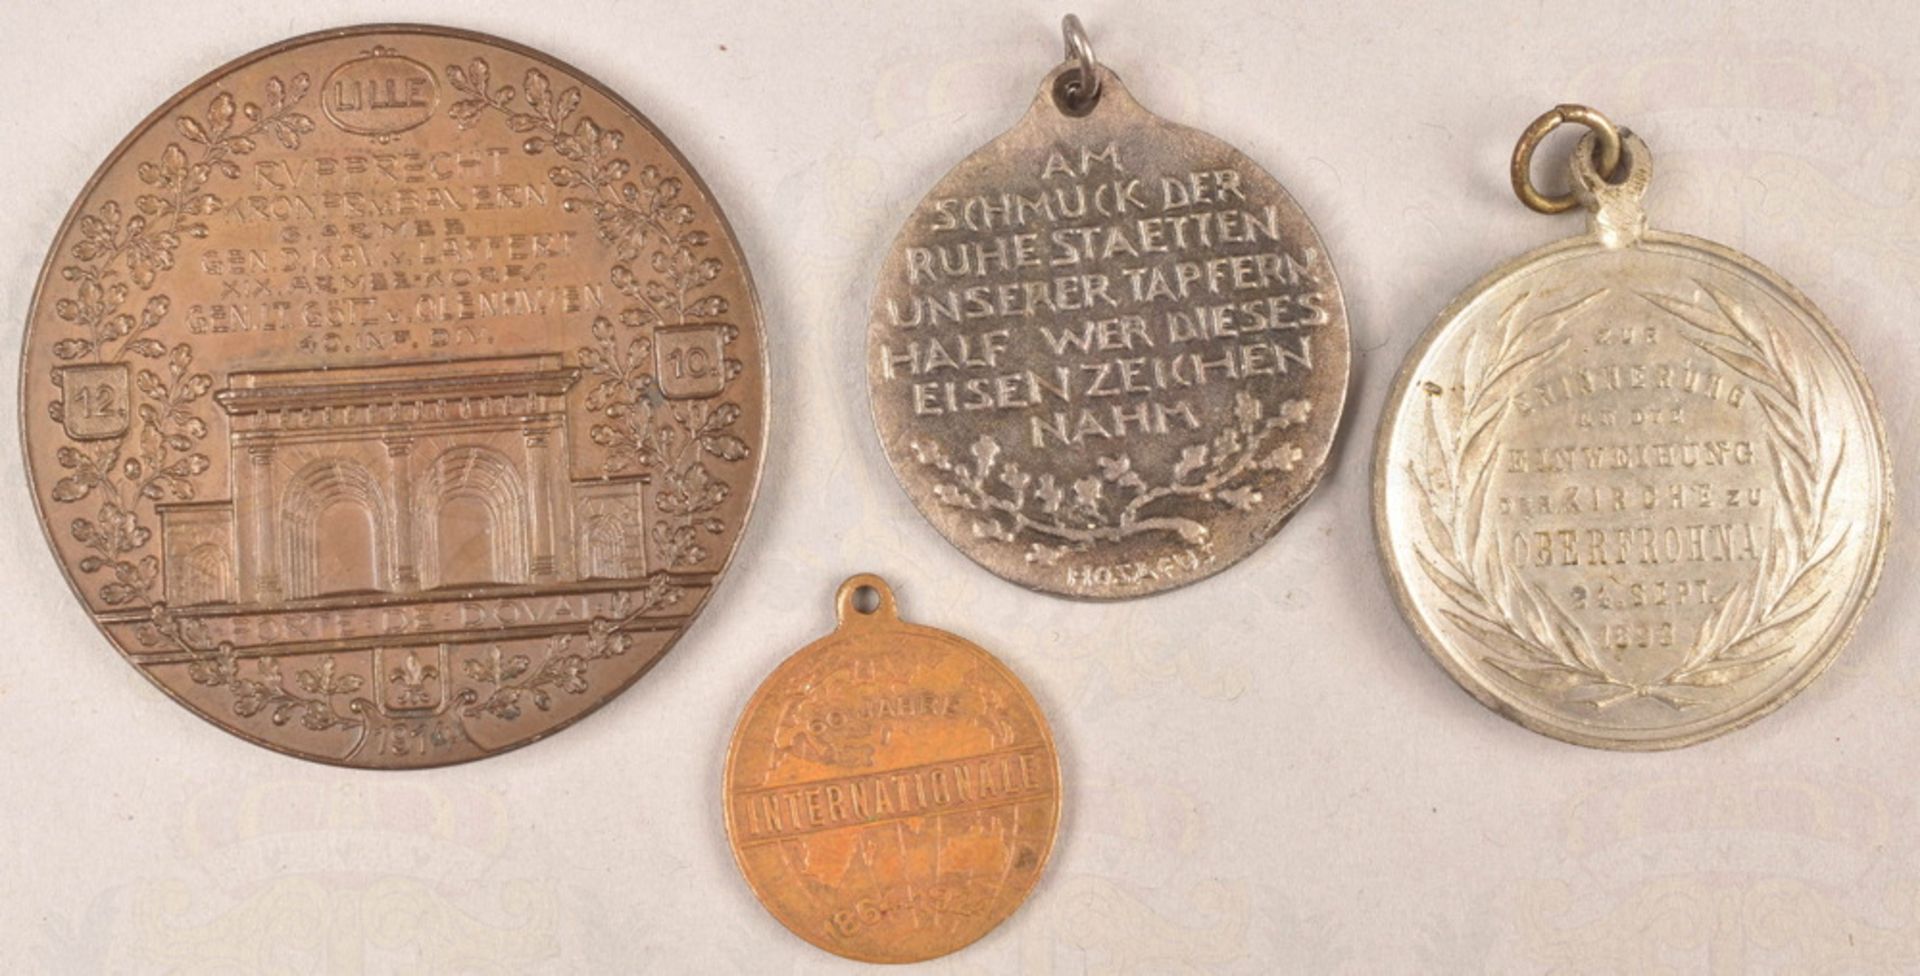 4 medals Germany 1893-1924 - Image 2 of 2